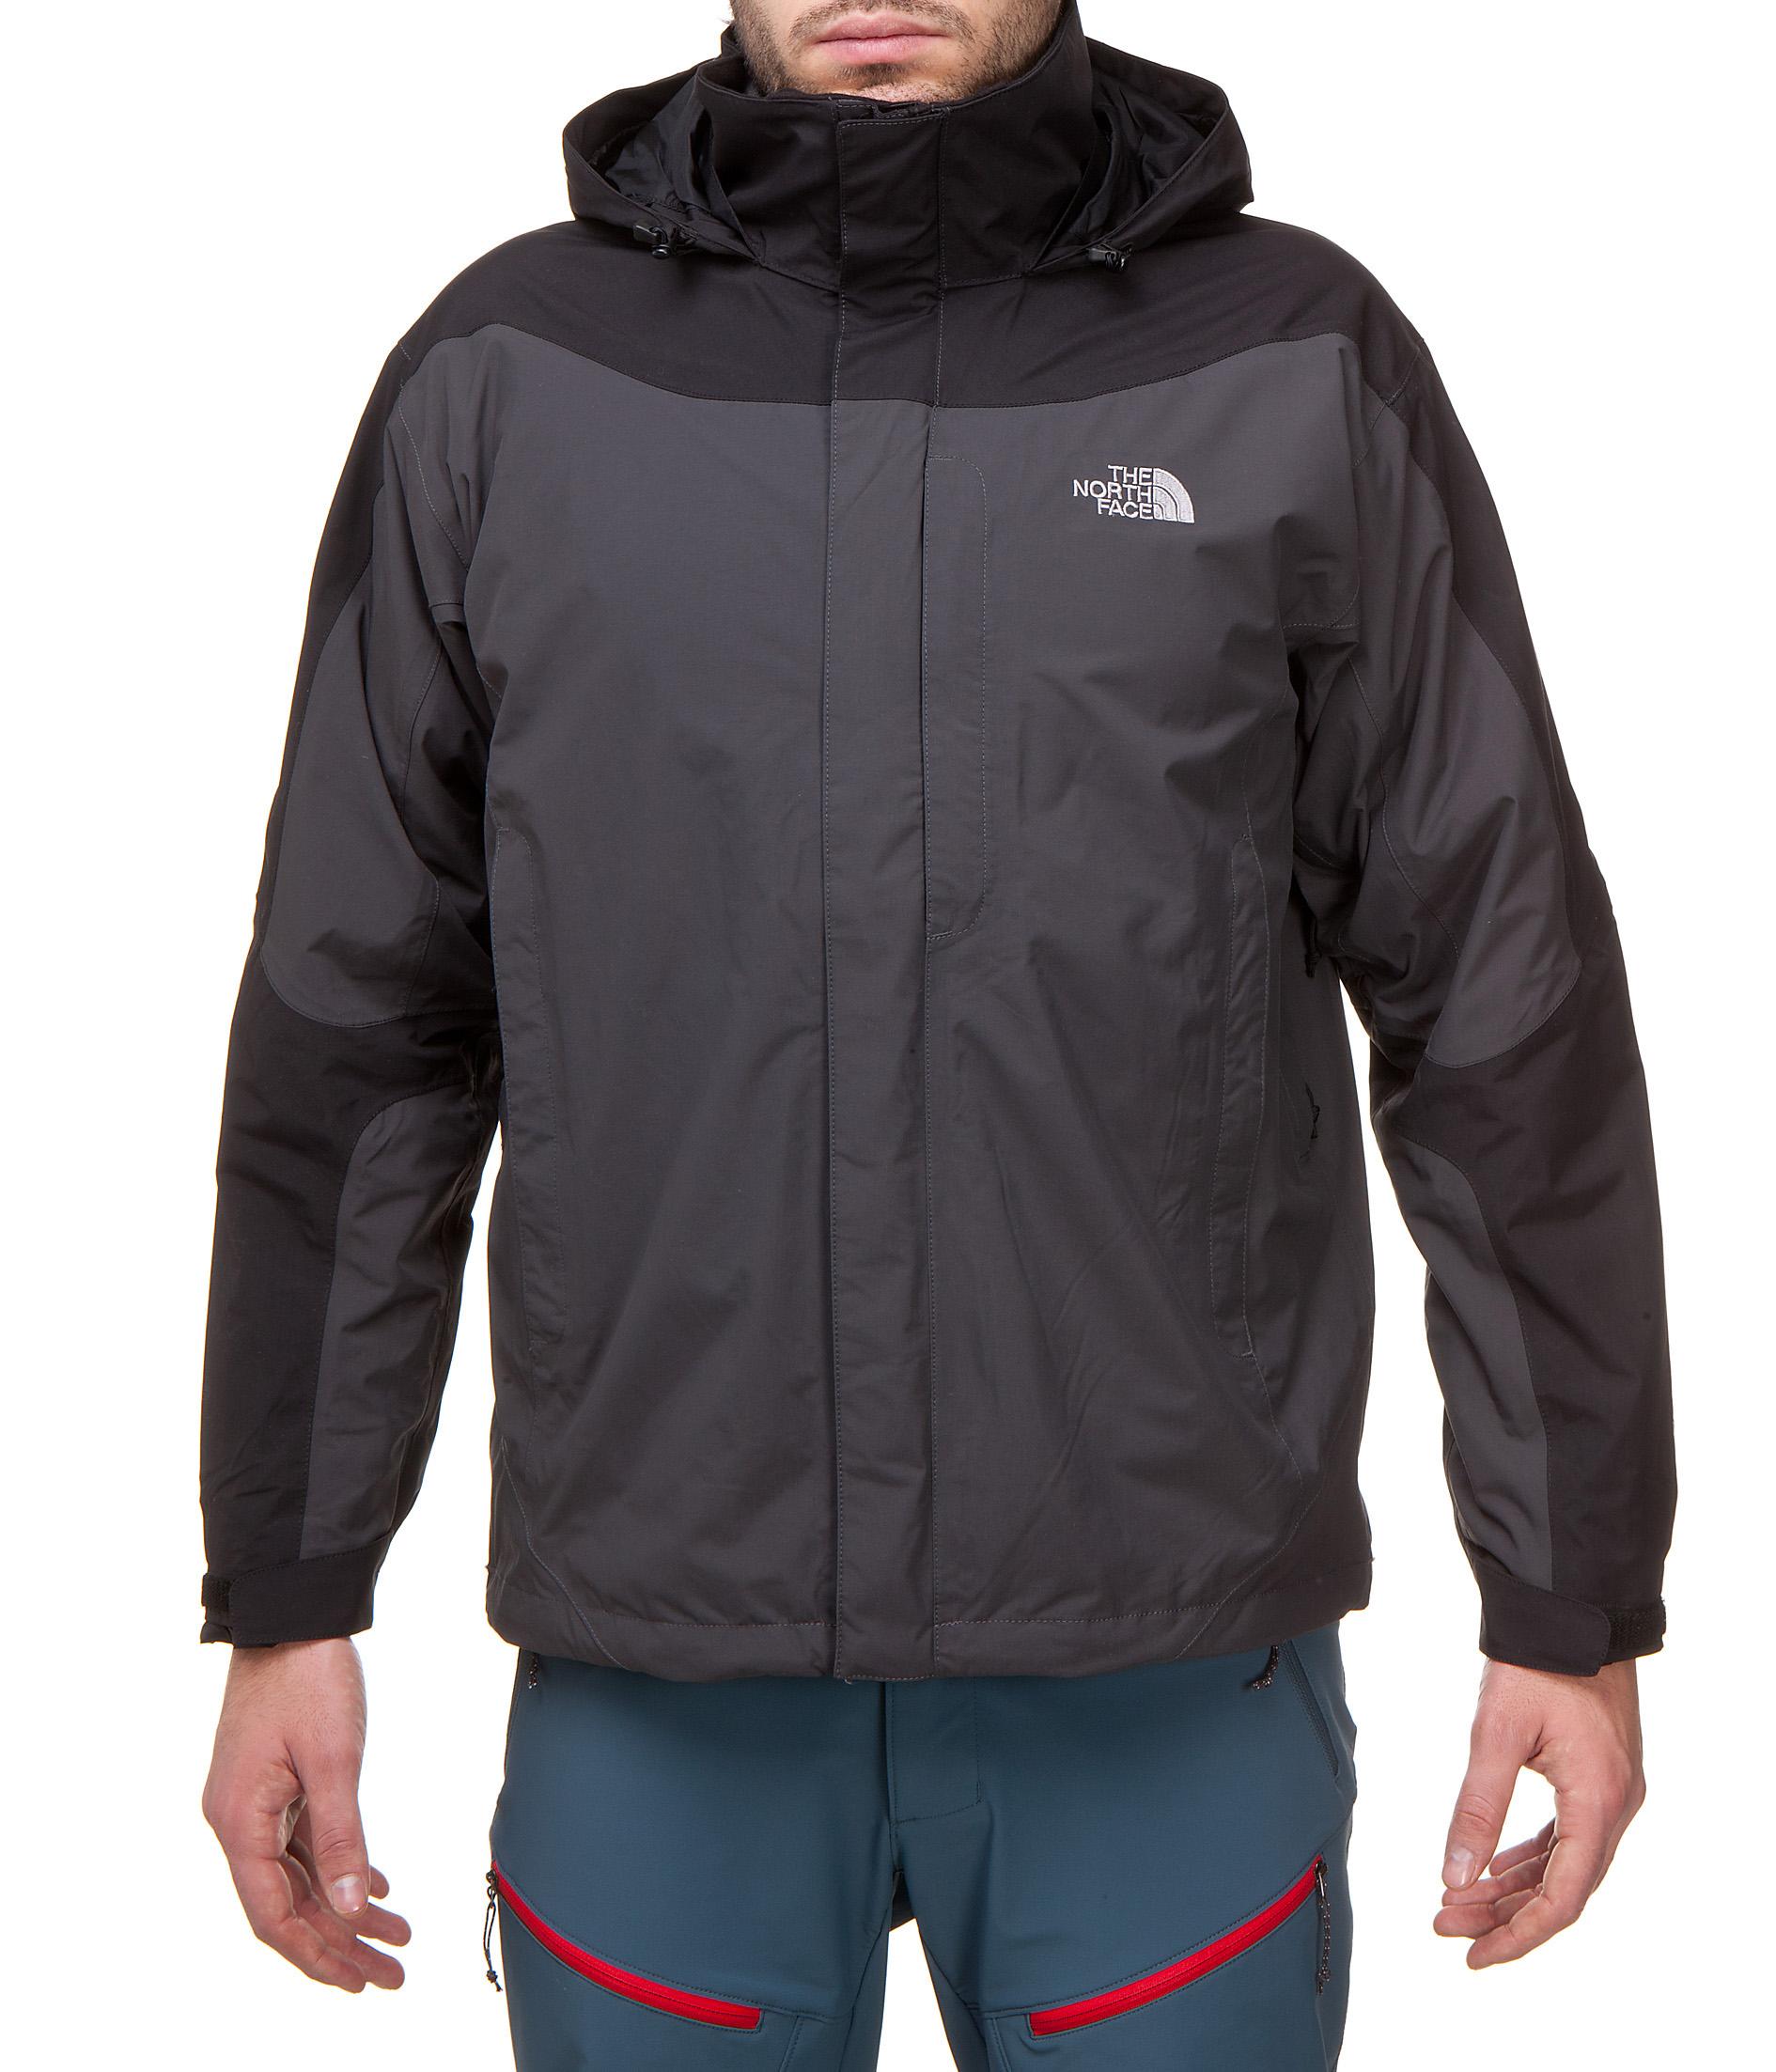 Foto The North Face Men's Evolution Triclimate Jacket